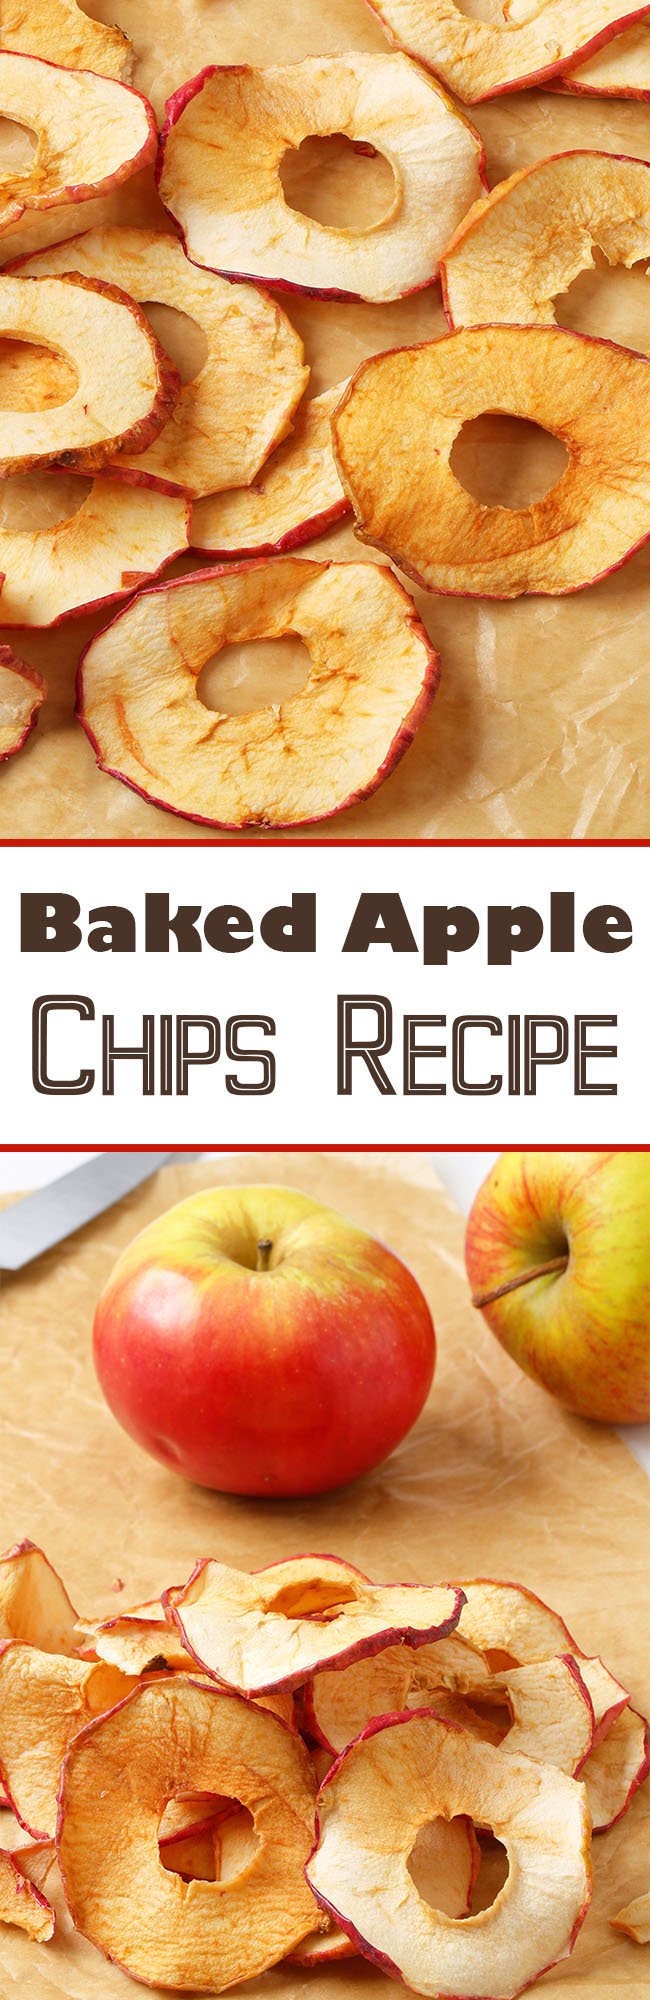 Baked #Apple Chips #Recipe